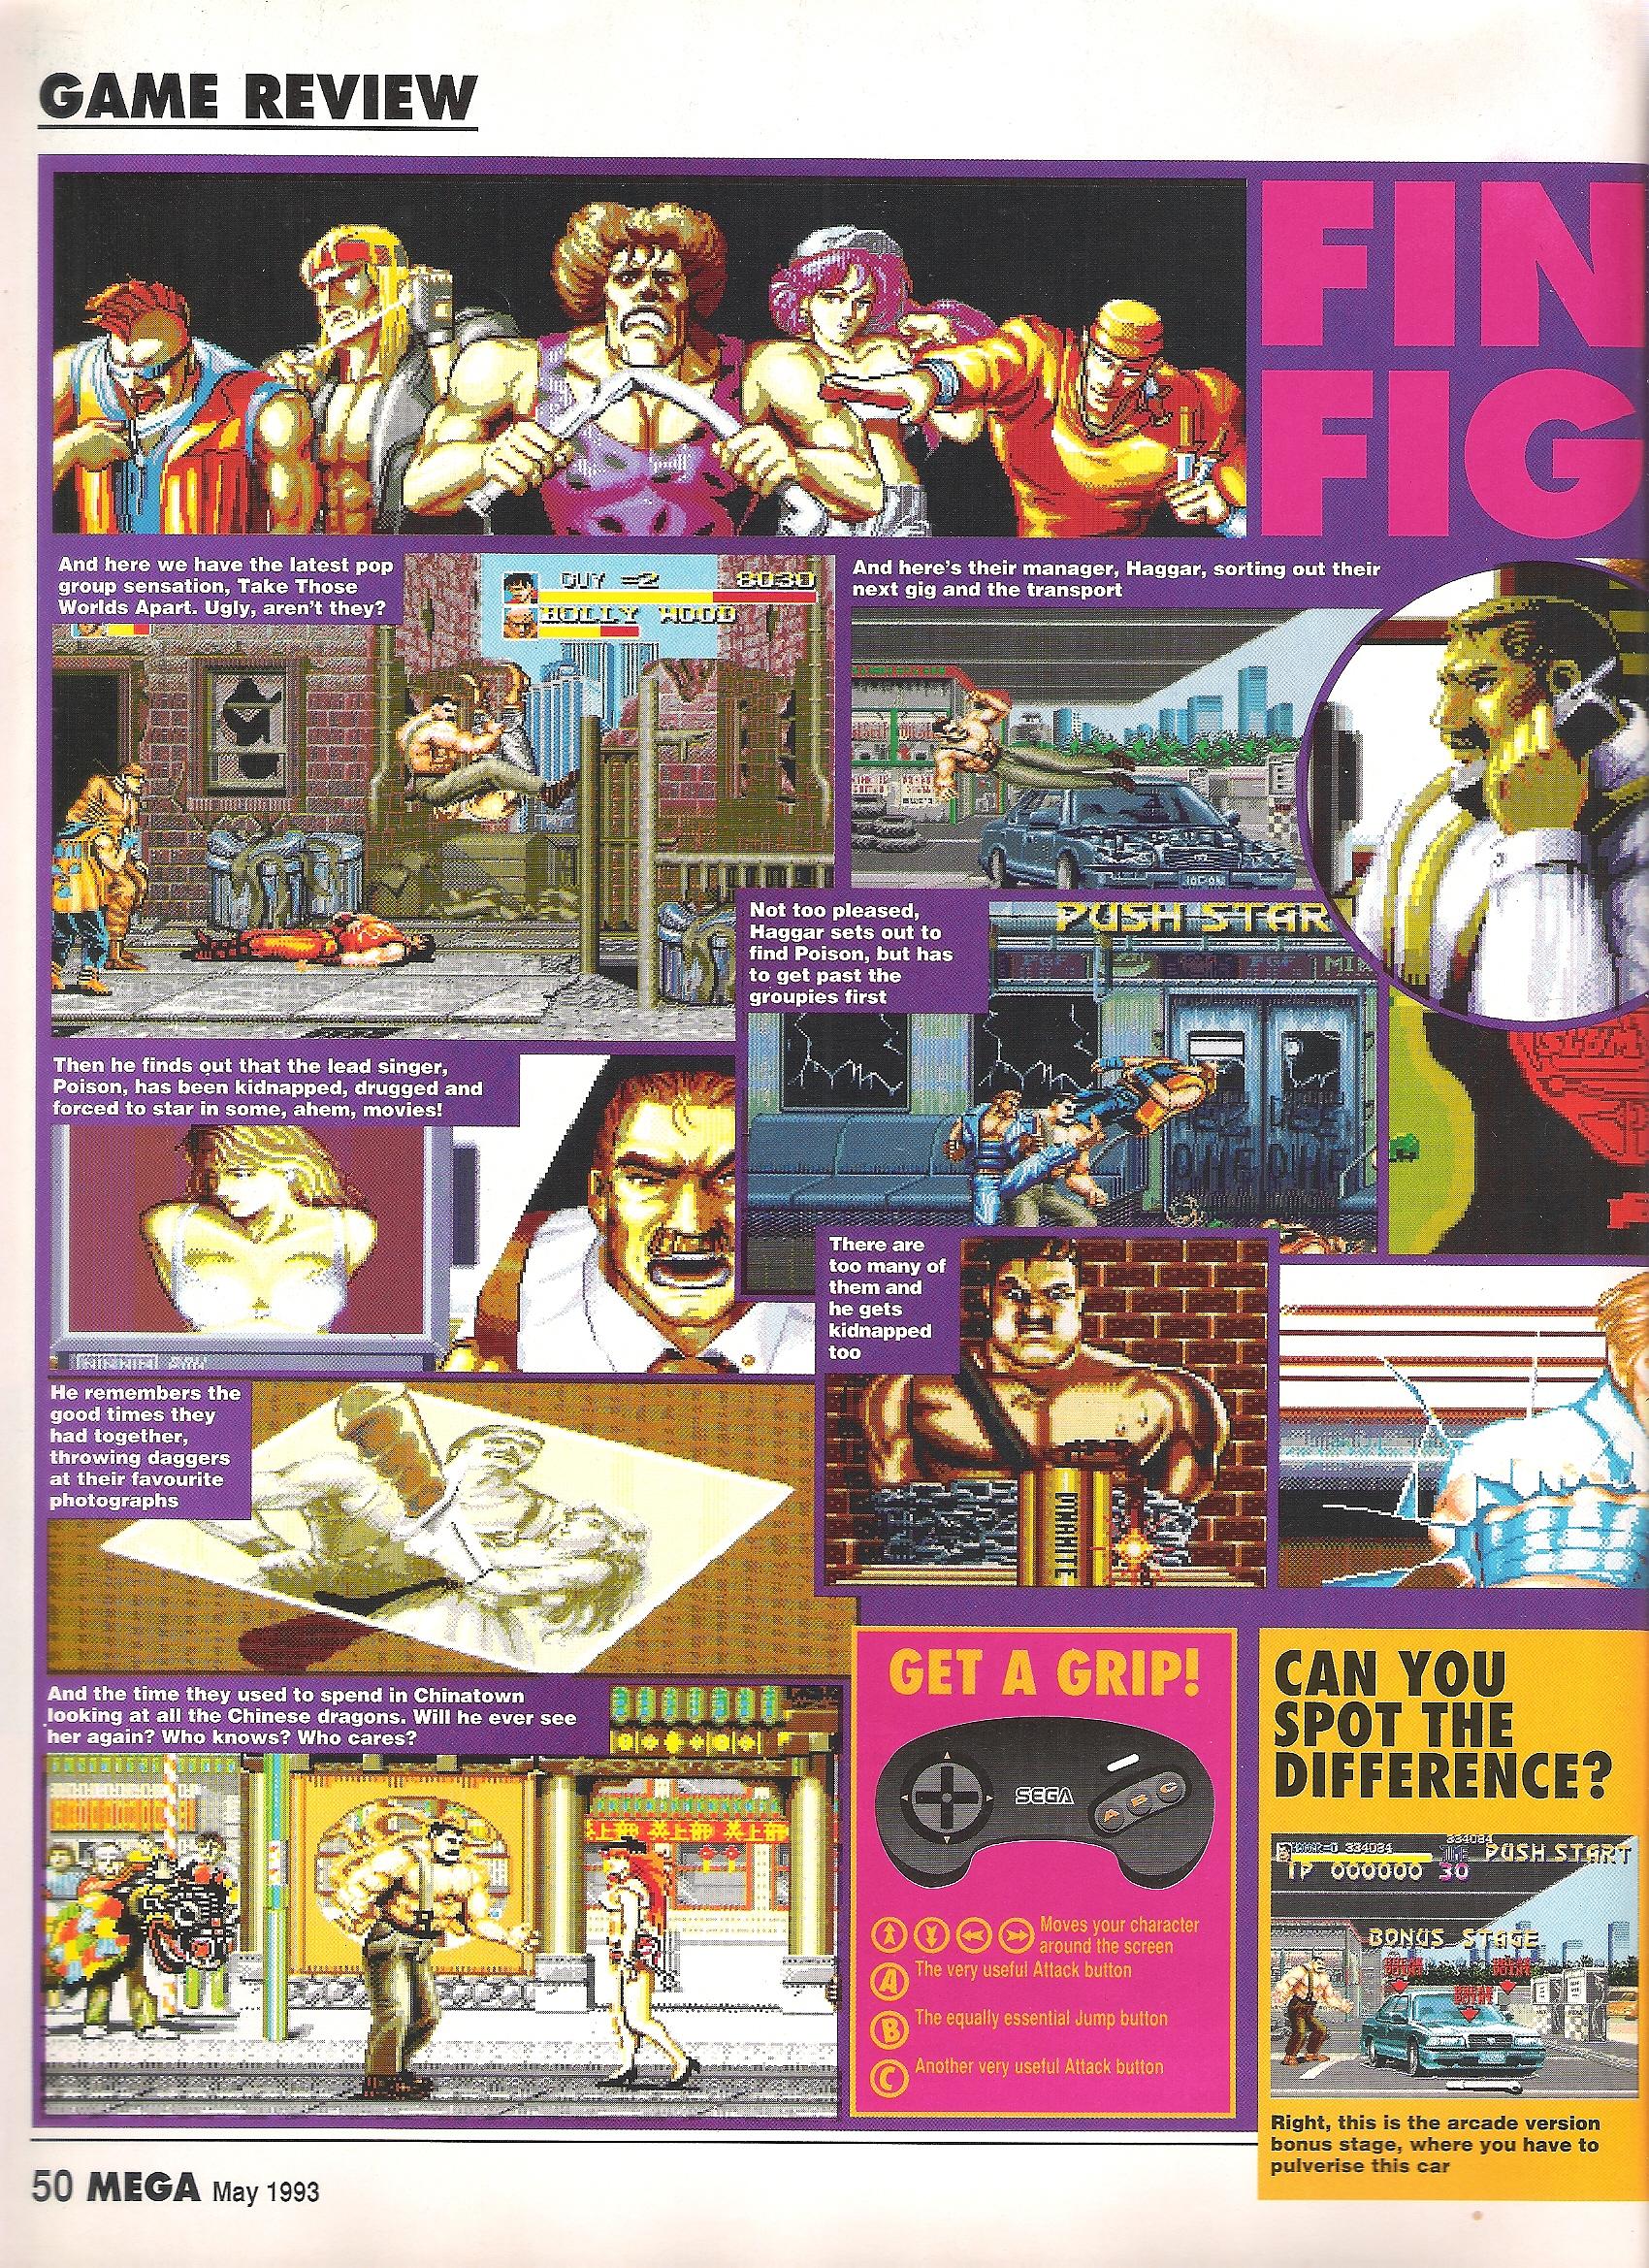 Final Fight CD Pics, Video Game Collection